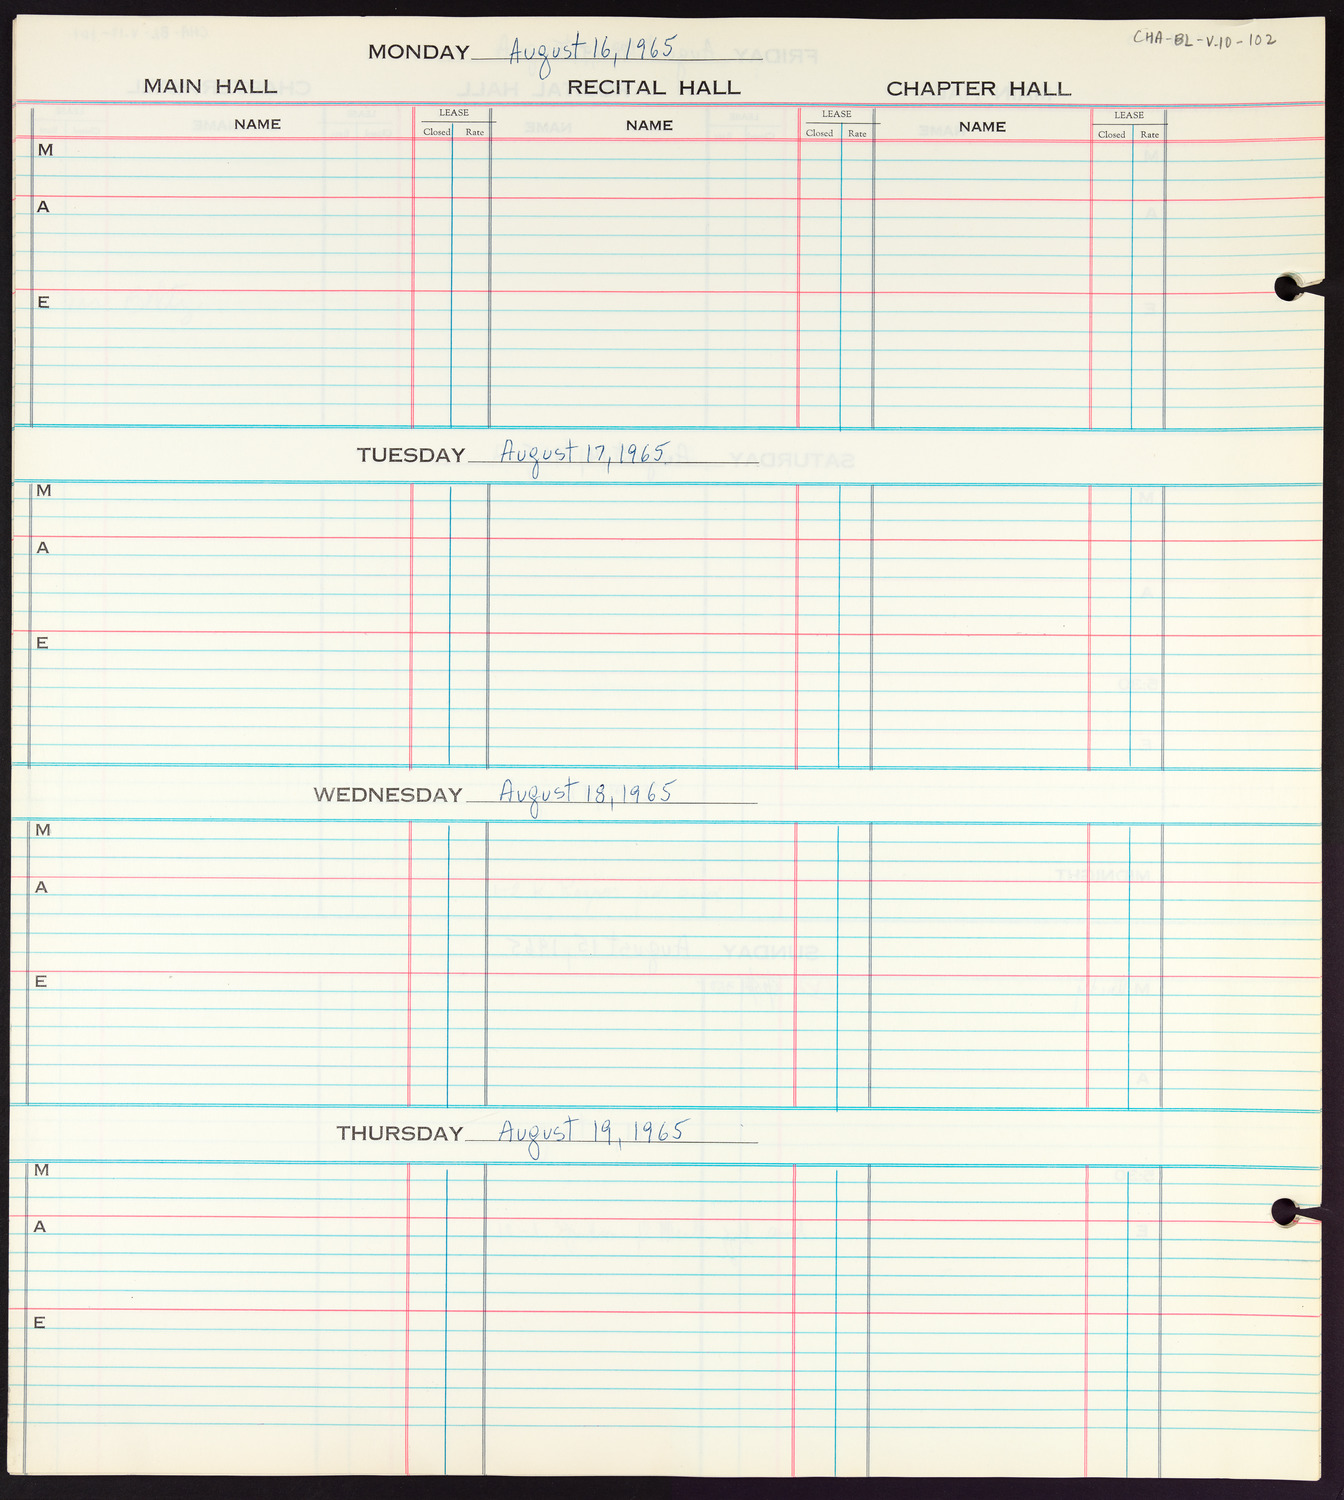 Carnegie Hall Booking Ledger, volume 10, page 102